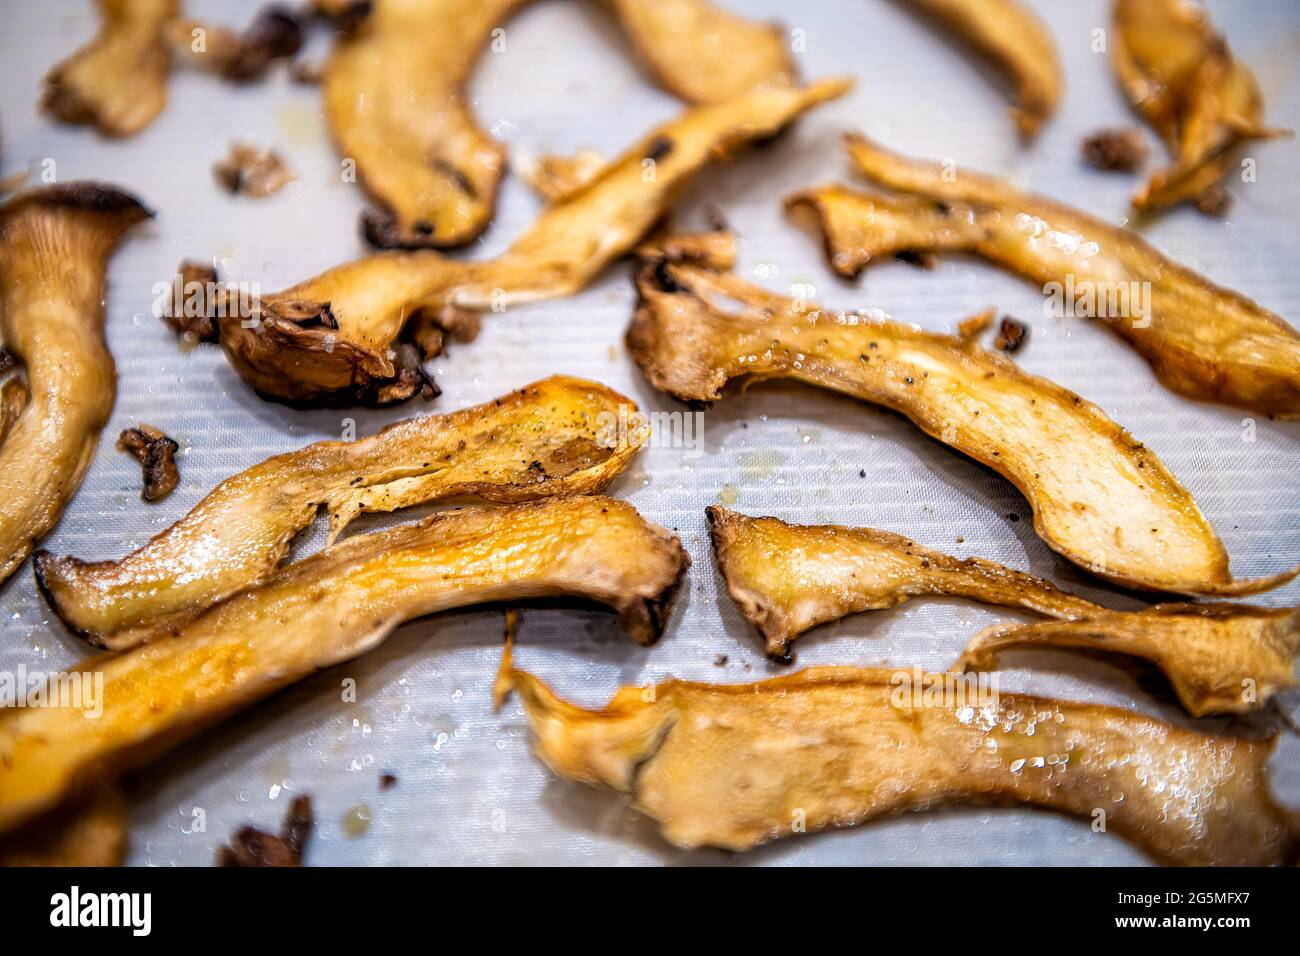 Vegan food substitution alternative for bacon or oyster mushrooms on tray drying dehydrating marinating as raw vegan food Stock Photo